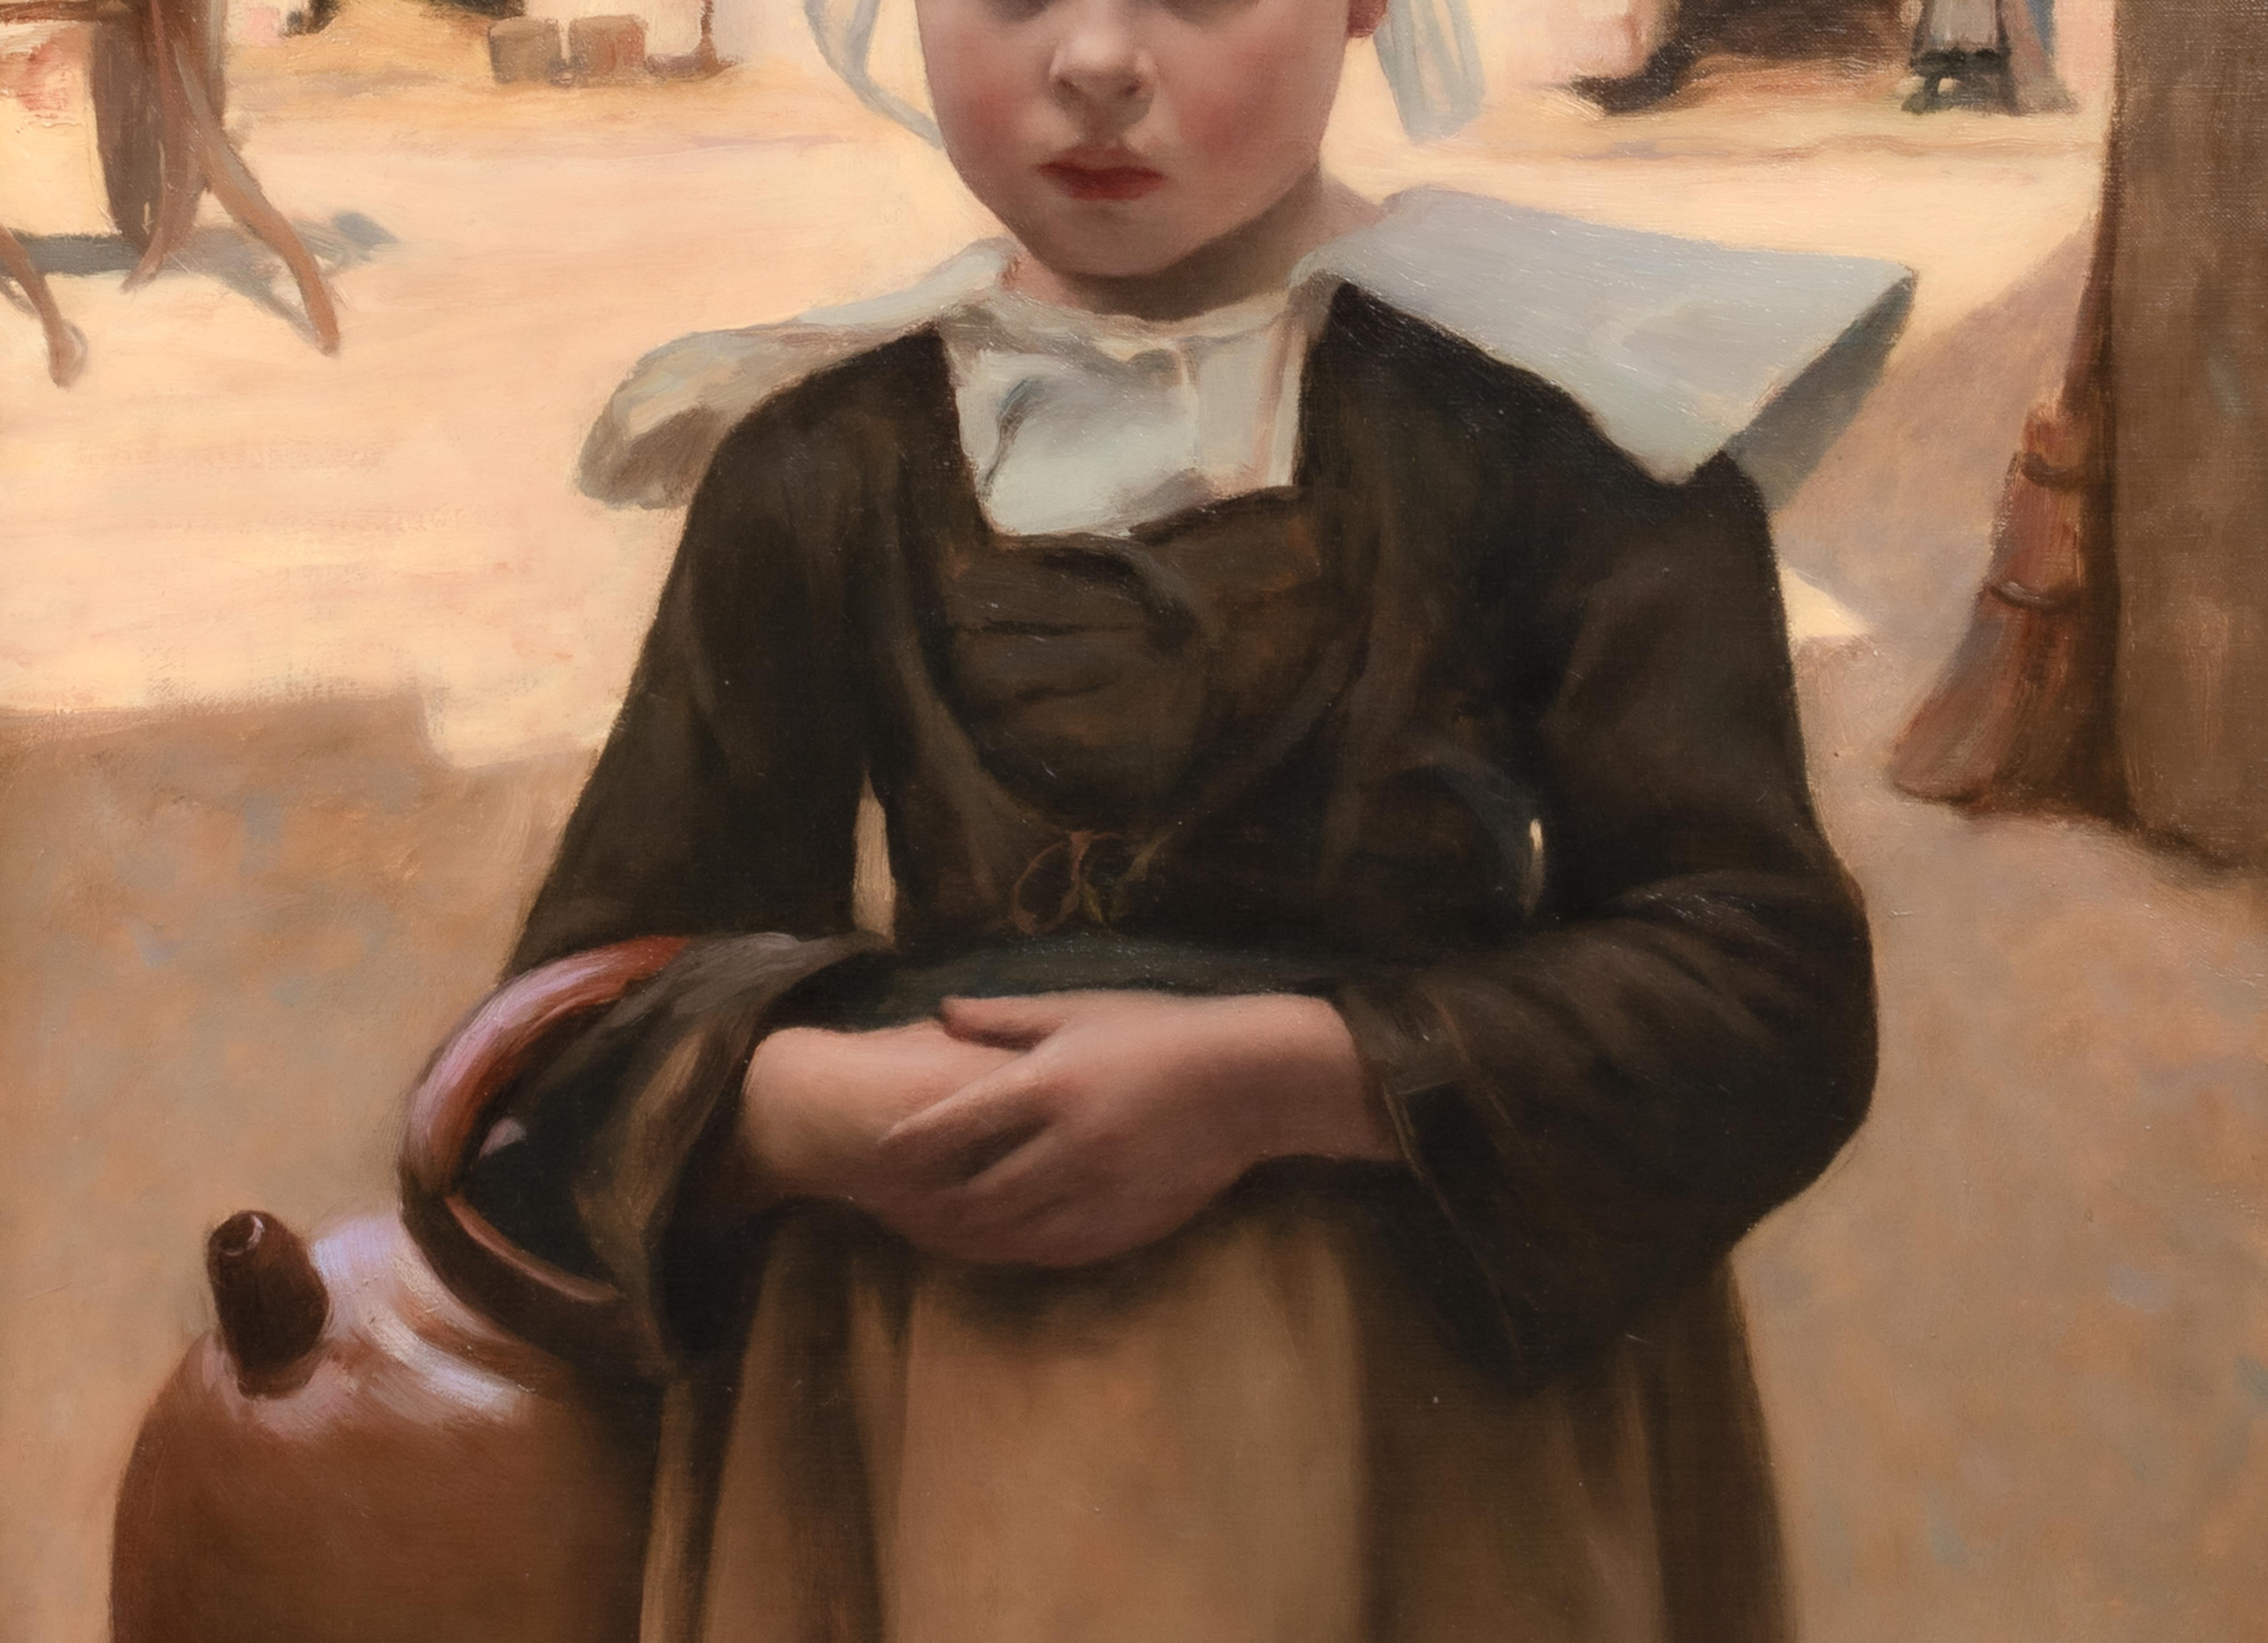 La Petite Laitière Bretonne, dated 1898

by Maurice GRÜN (1869-1947)

Large 19th Century French Breton village girl portrait, oil on canvas by Maurice Grun. Exceptional quality and condition example of the French painters work capturing the